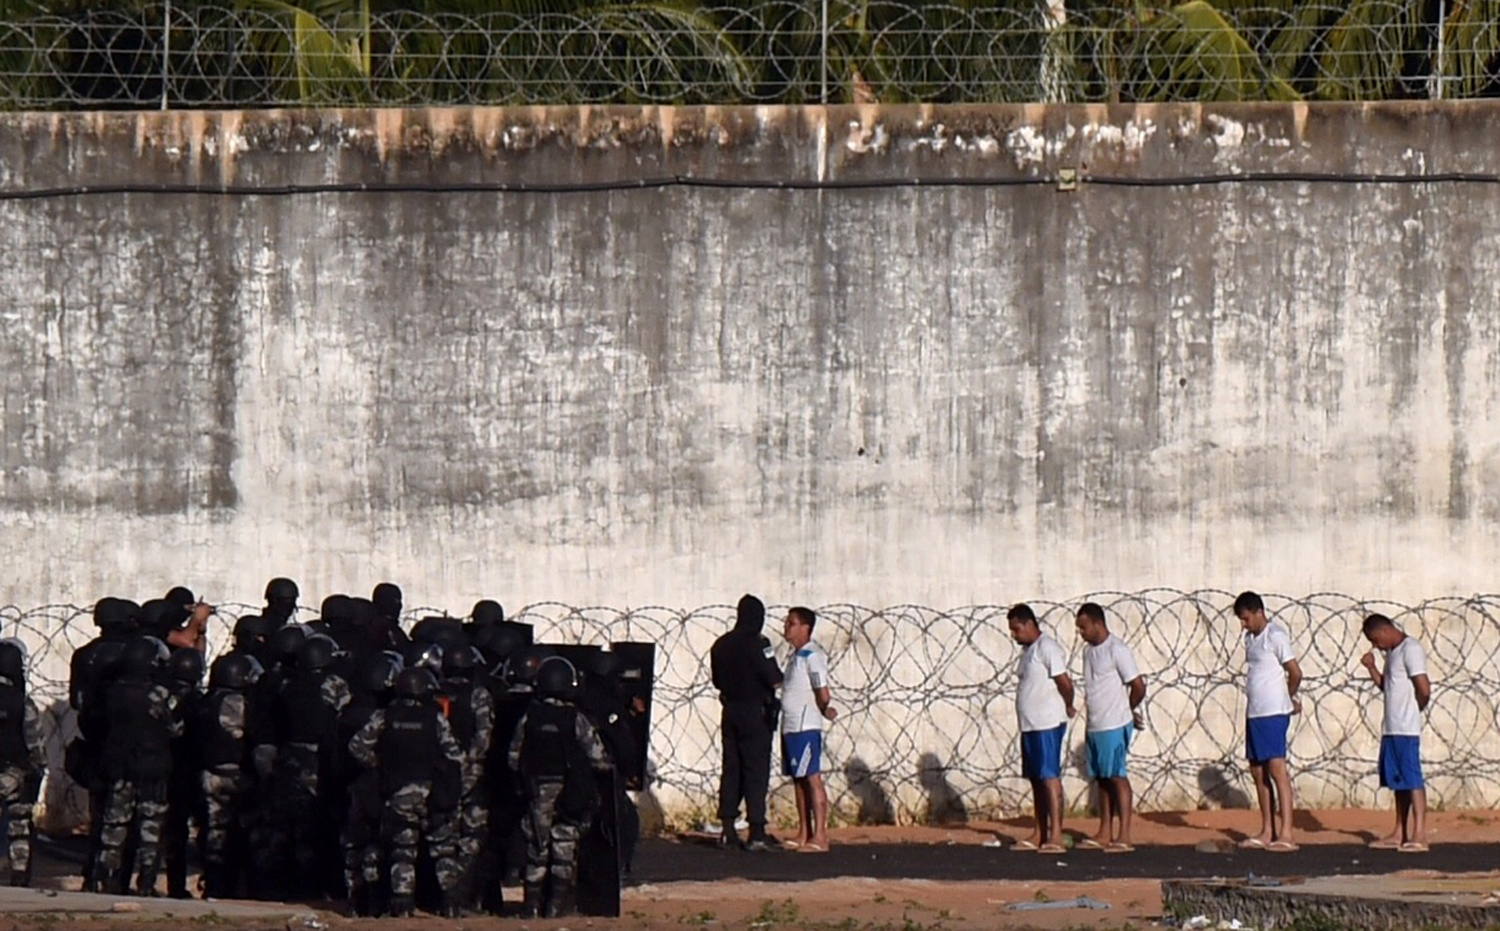 NATAL 2017-01-16 Inmates stand in front of riot police after a new uprising broke out at Alcacuz prison in Natal, Rio Grande do Norte state, Brazil, January 16, 2017. REUTERS/Josemar Goncalves FOR EDITORIAL USE ONLY. NO RESALES. NO ARCHIVES TPX IMAGES OF THE DAY Photo: / REUTERS / TT / kod 72000